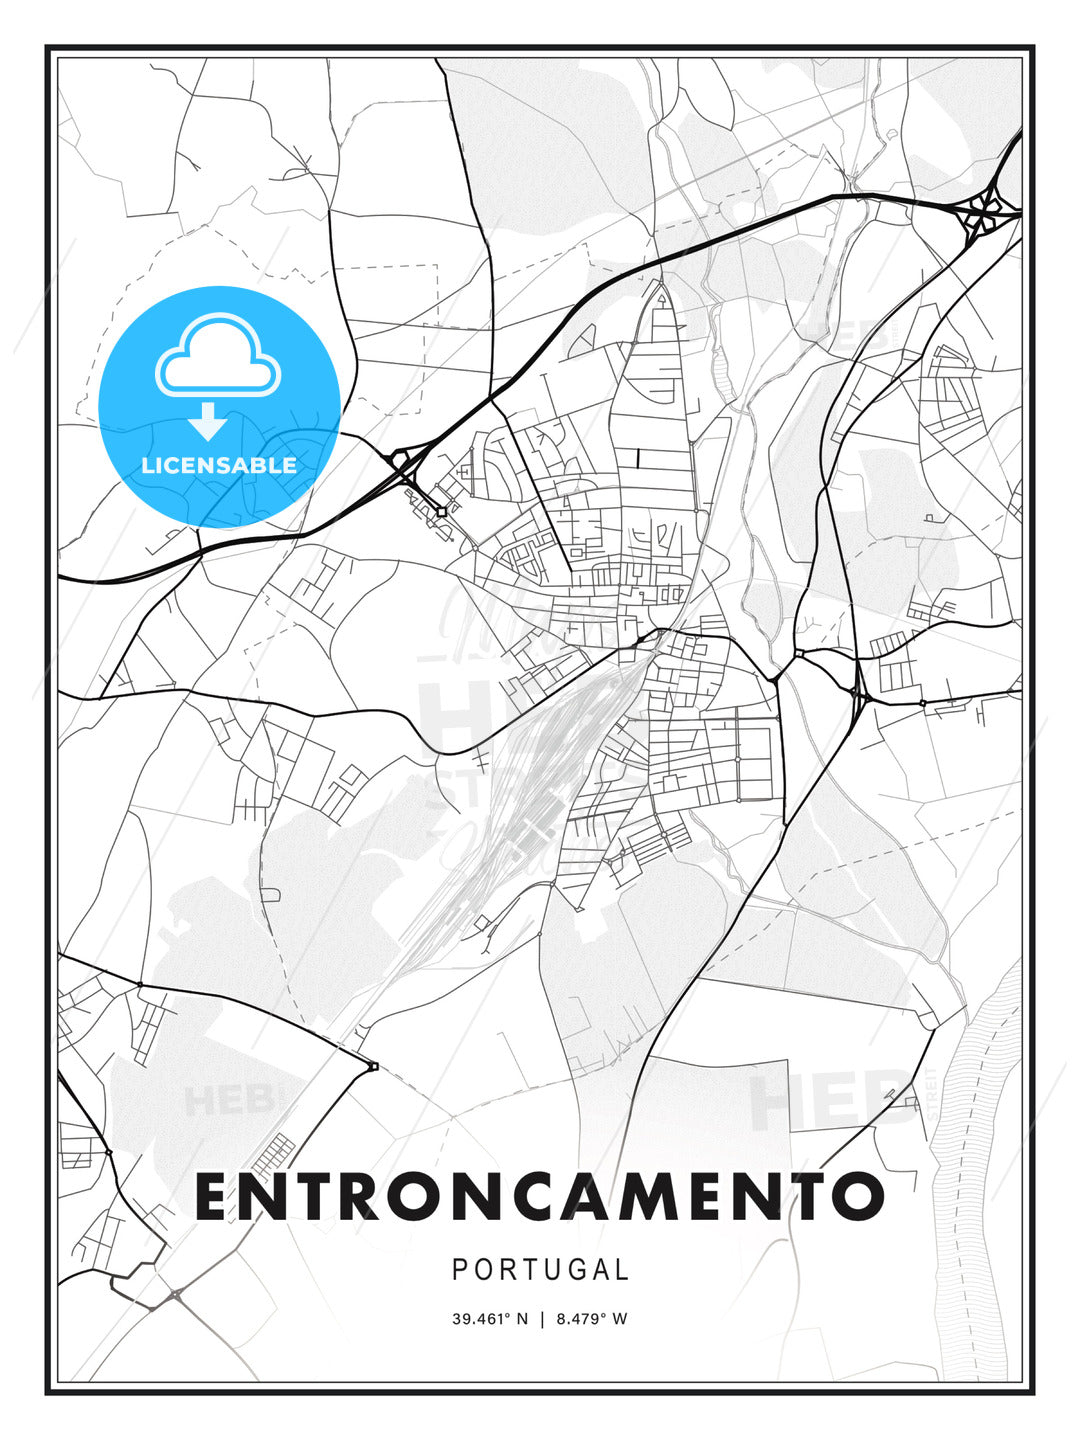 Entroncamento, Portugal, Modern Print Template in Various Formats - HEBSTREITS Sketches